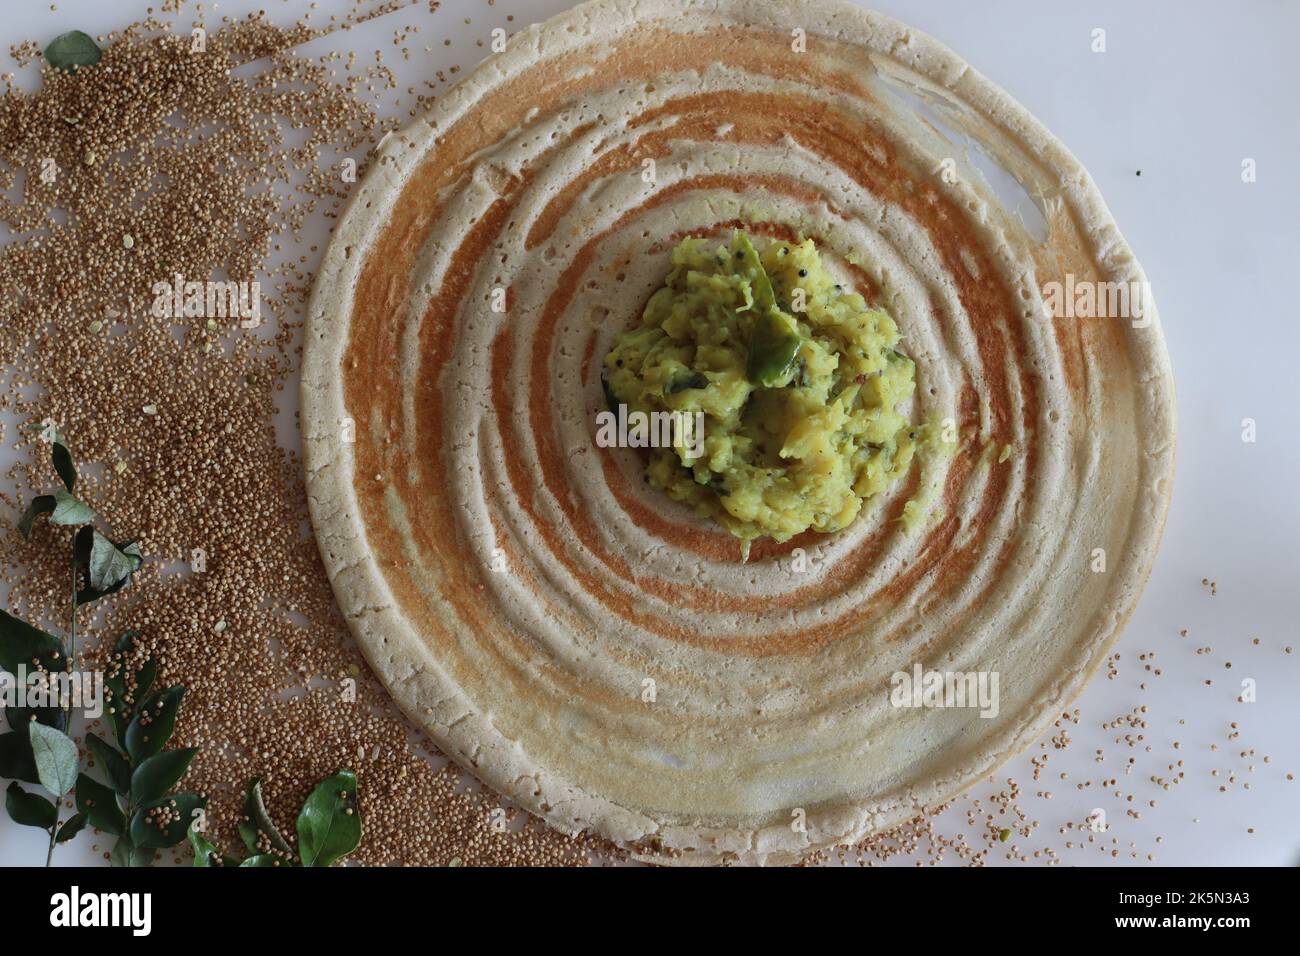 Kodo millet masala dosa. Thin crispy crepes made of kodo millet and lentils flour, stuffed with spiced mashed potatoes. Shot on white background. Stock Photo